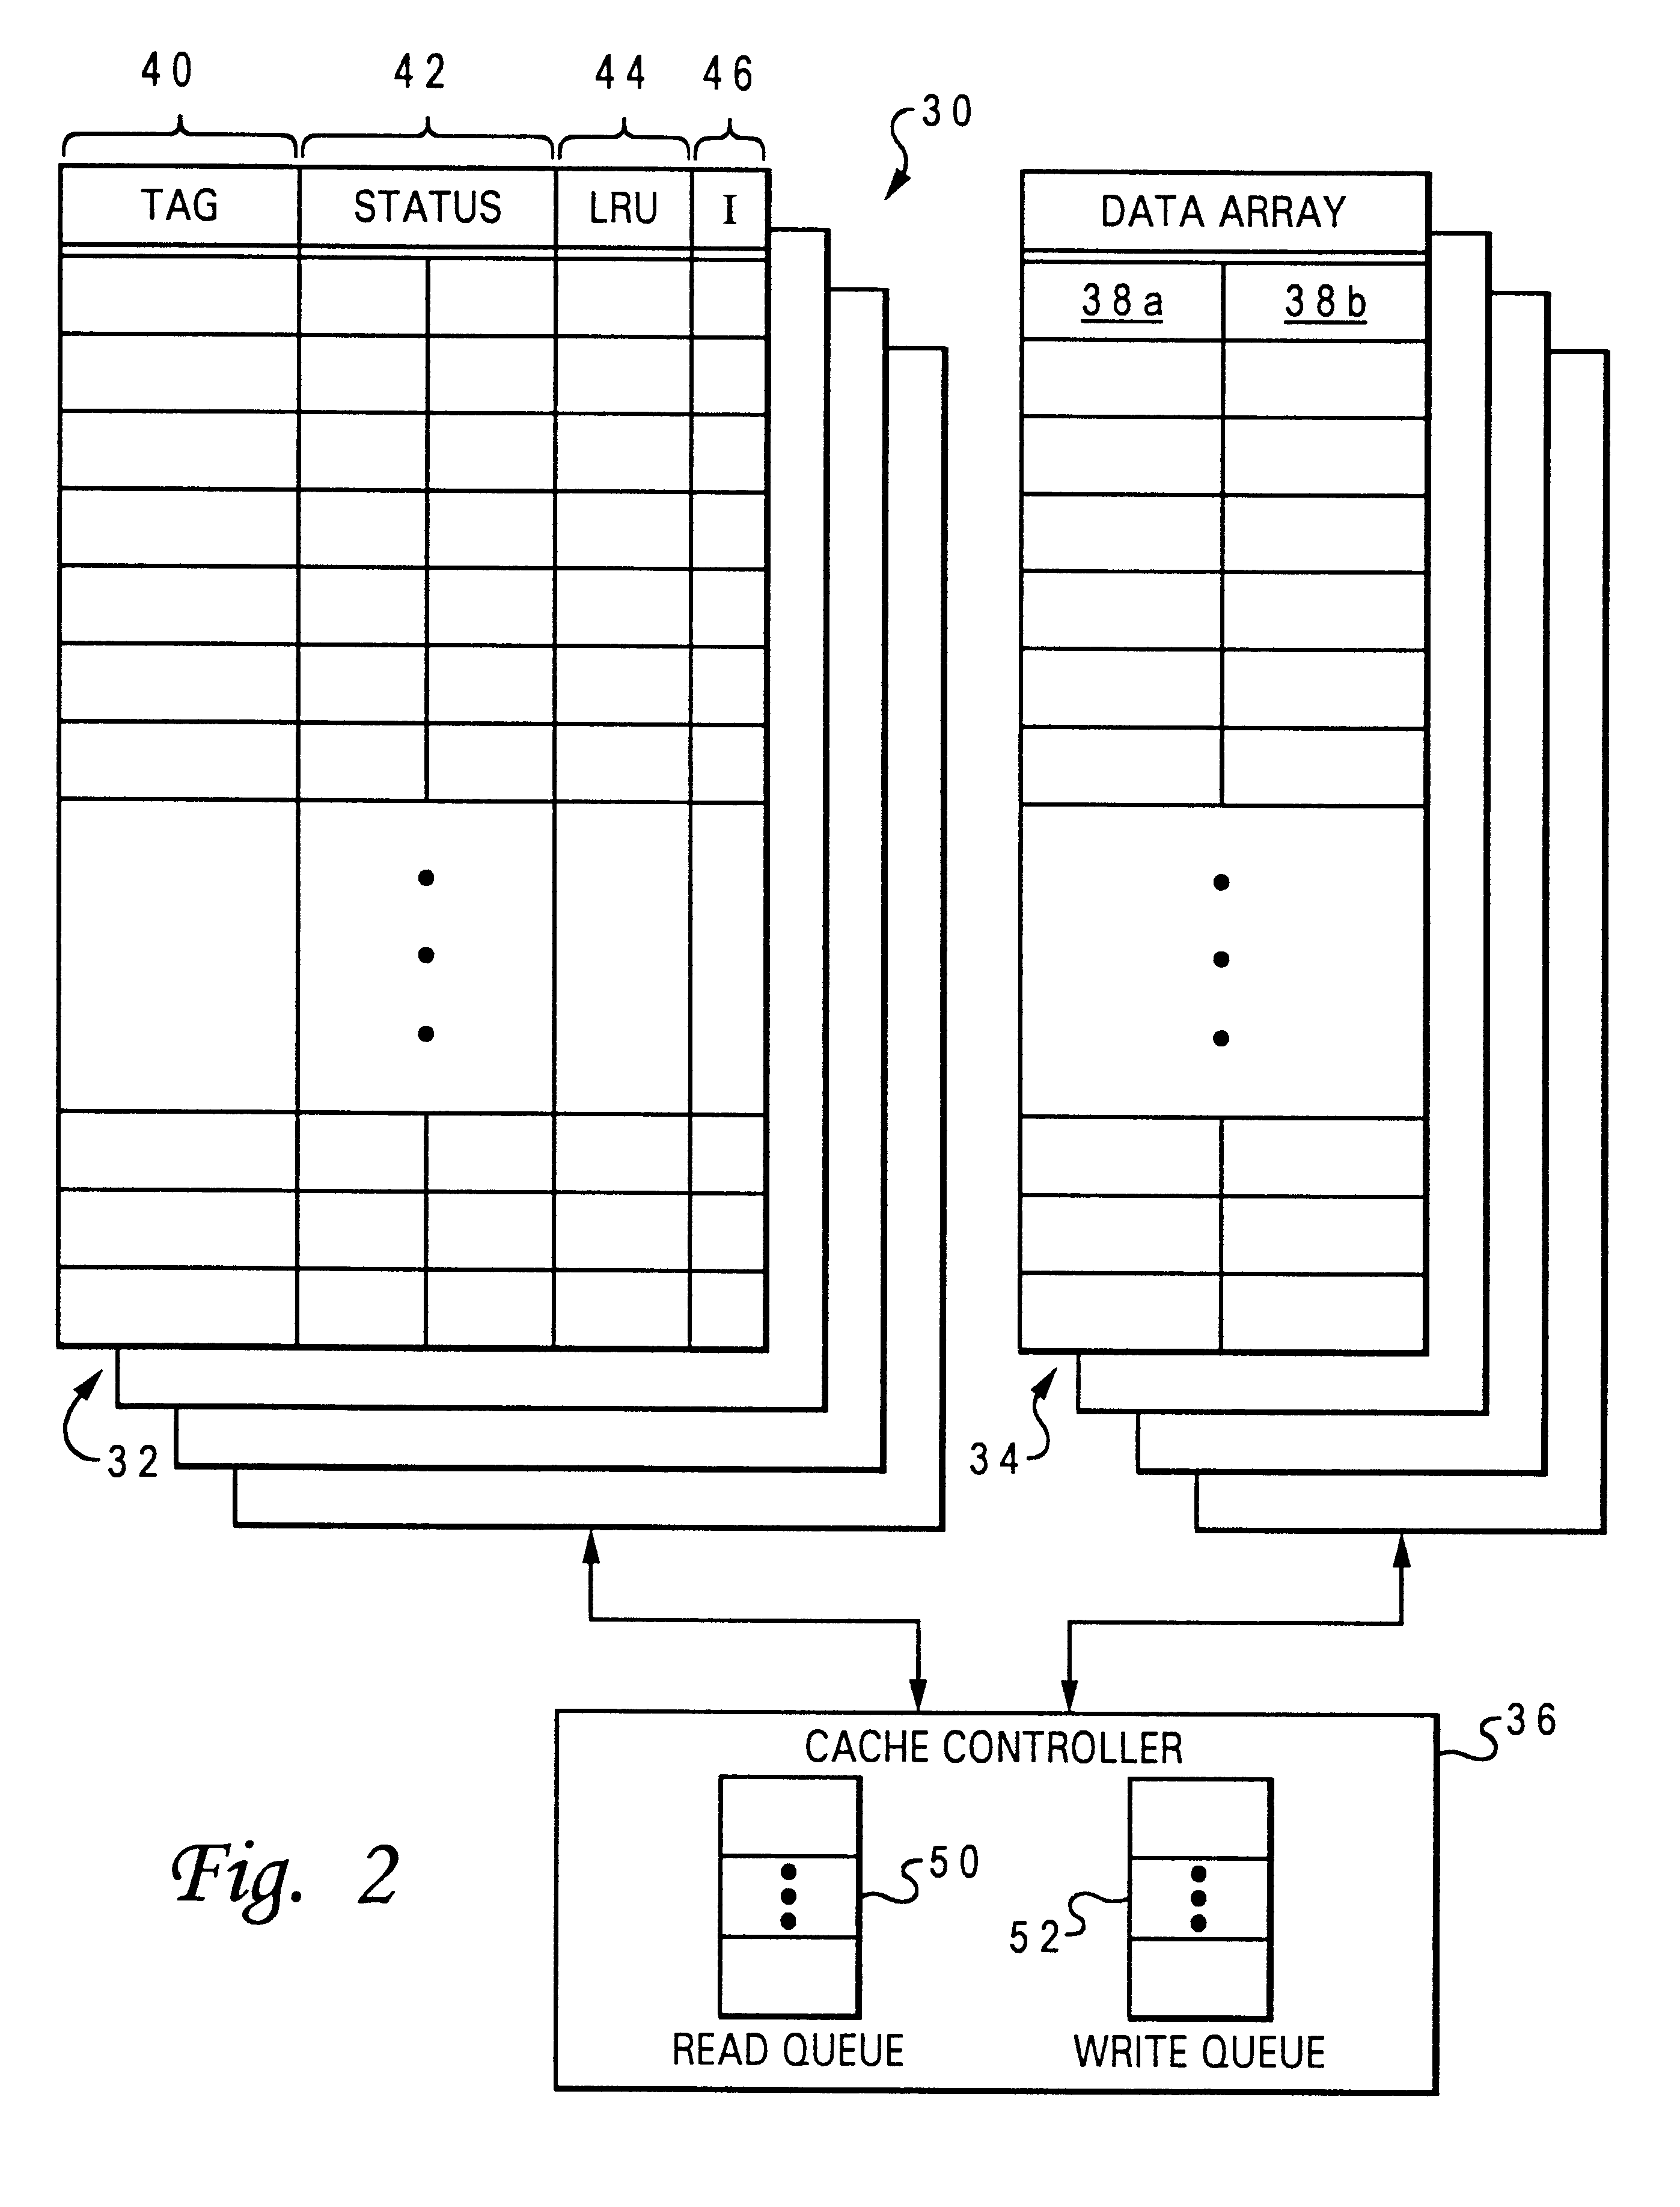 Multiprocessor system bus protocol for O state memory-consistent data